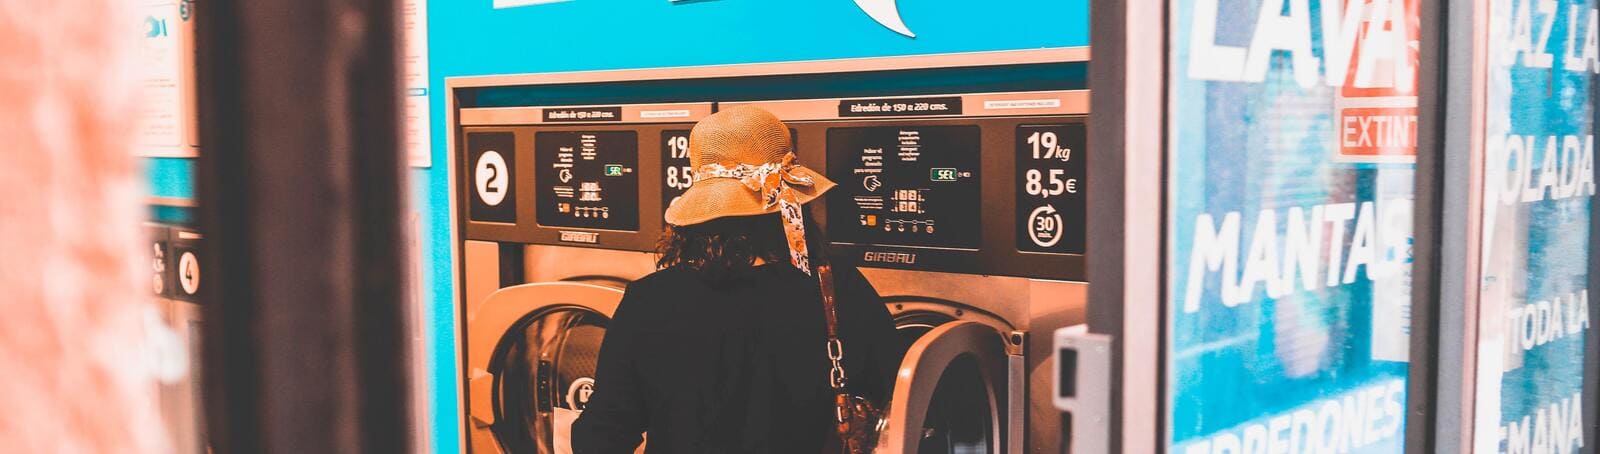 The Ultimate Guide to Laundry Services While Traveling